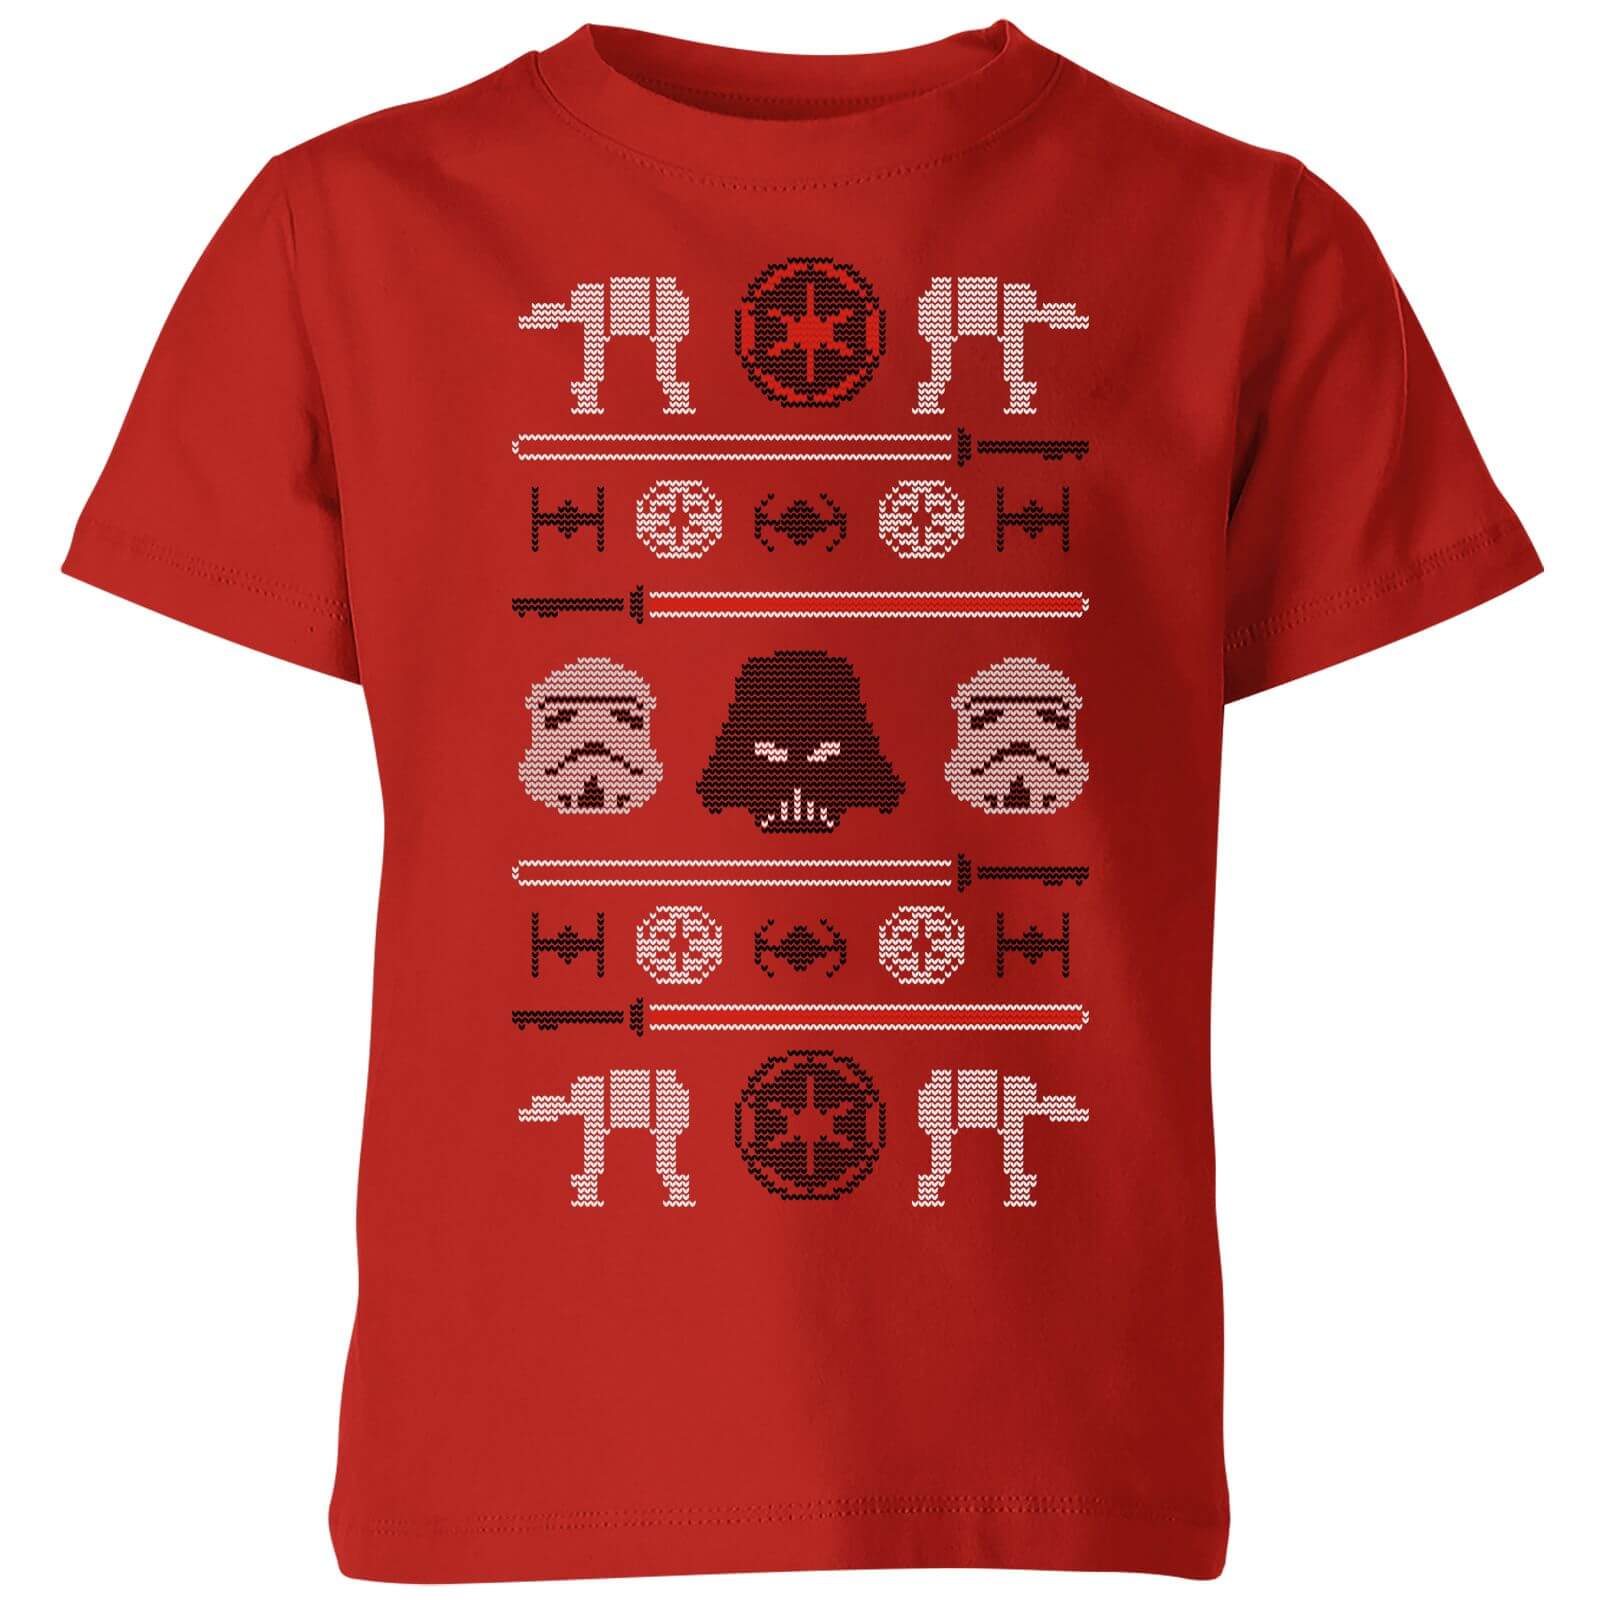 Star Wars Imperial Knit Kids' Christmas T-Shirt - Red - 7-8 Years - Red